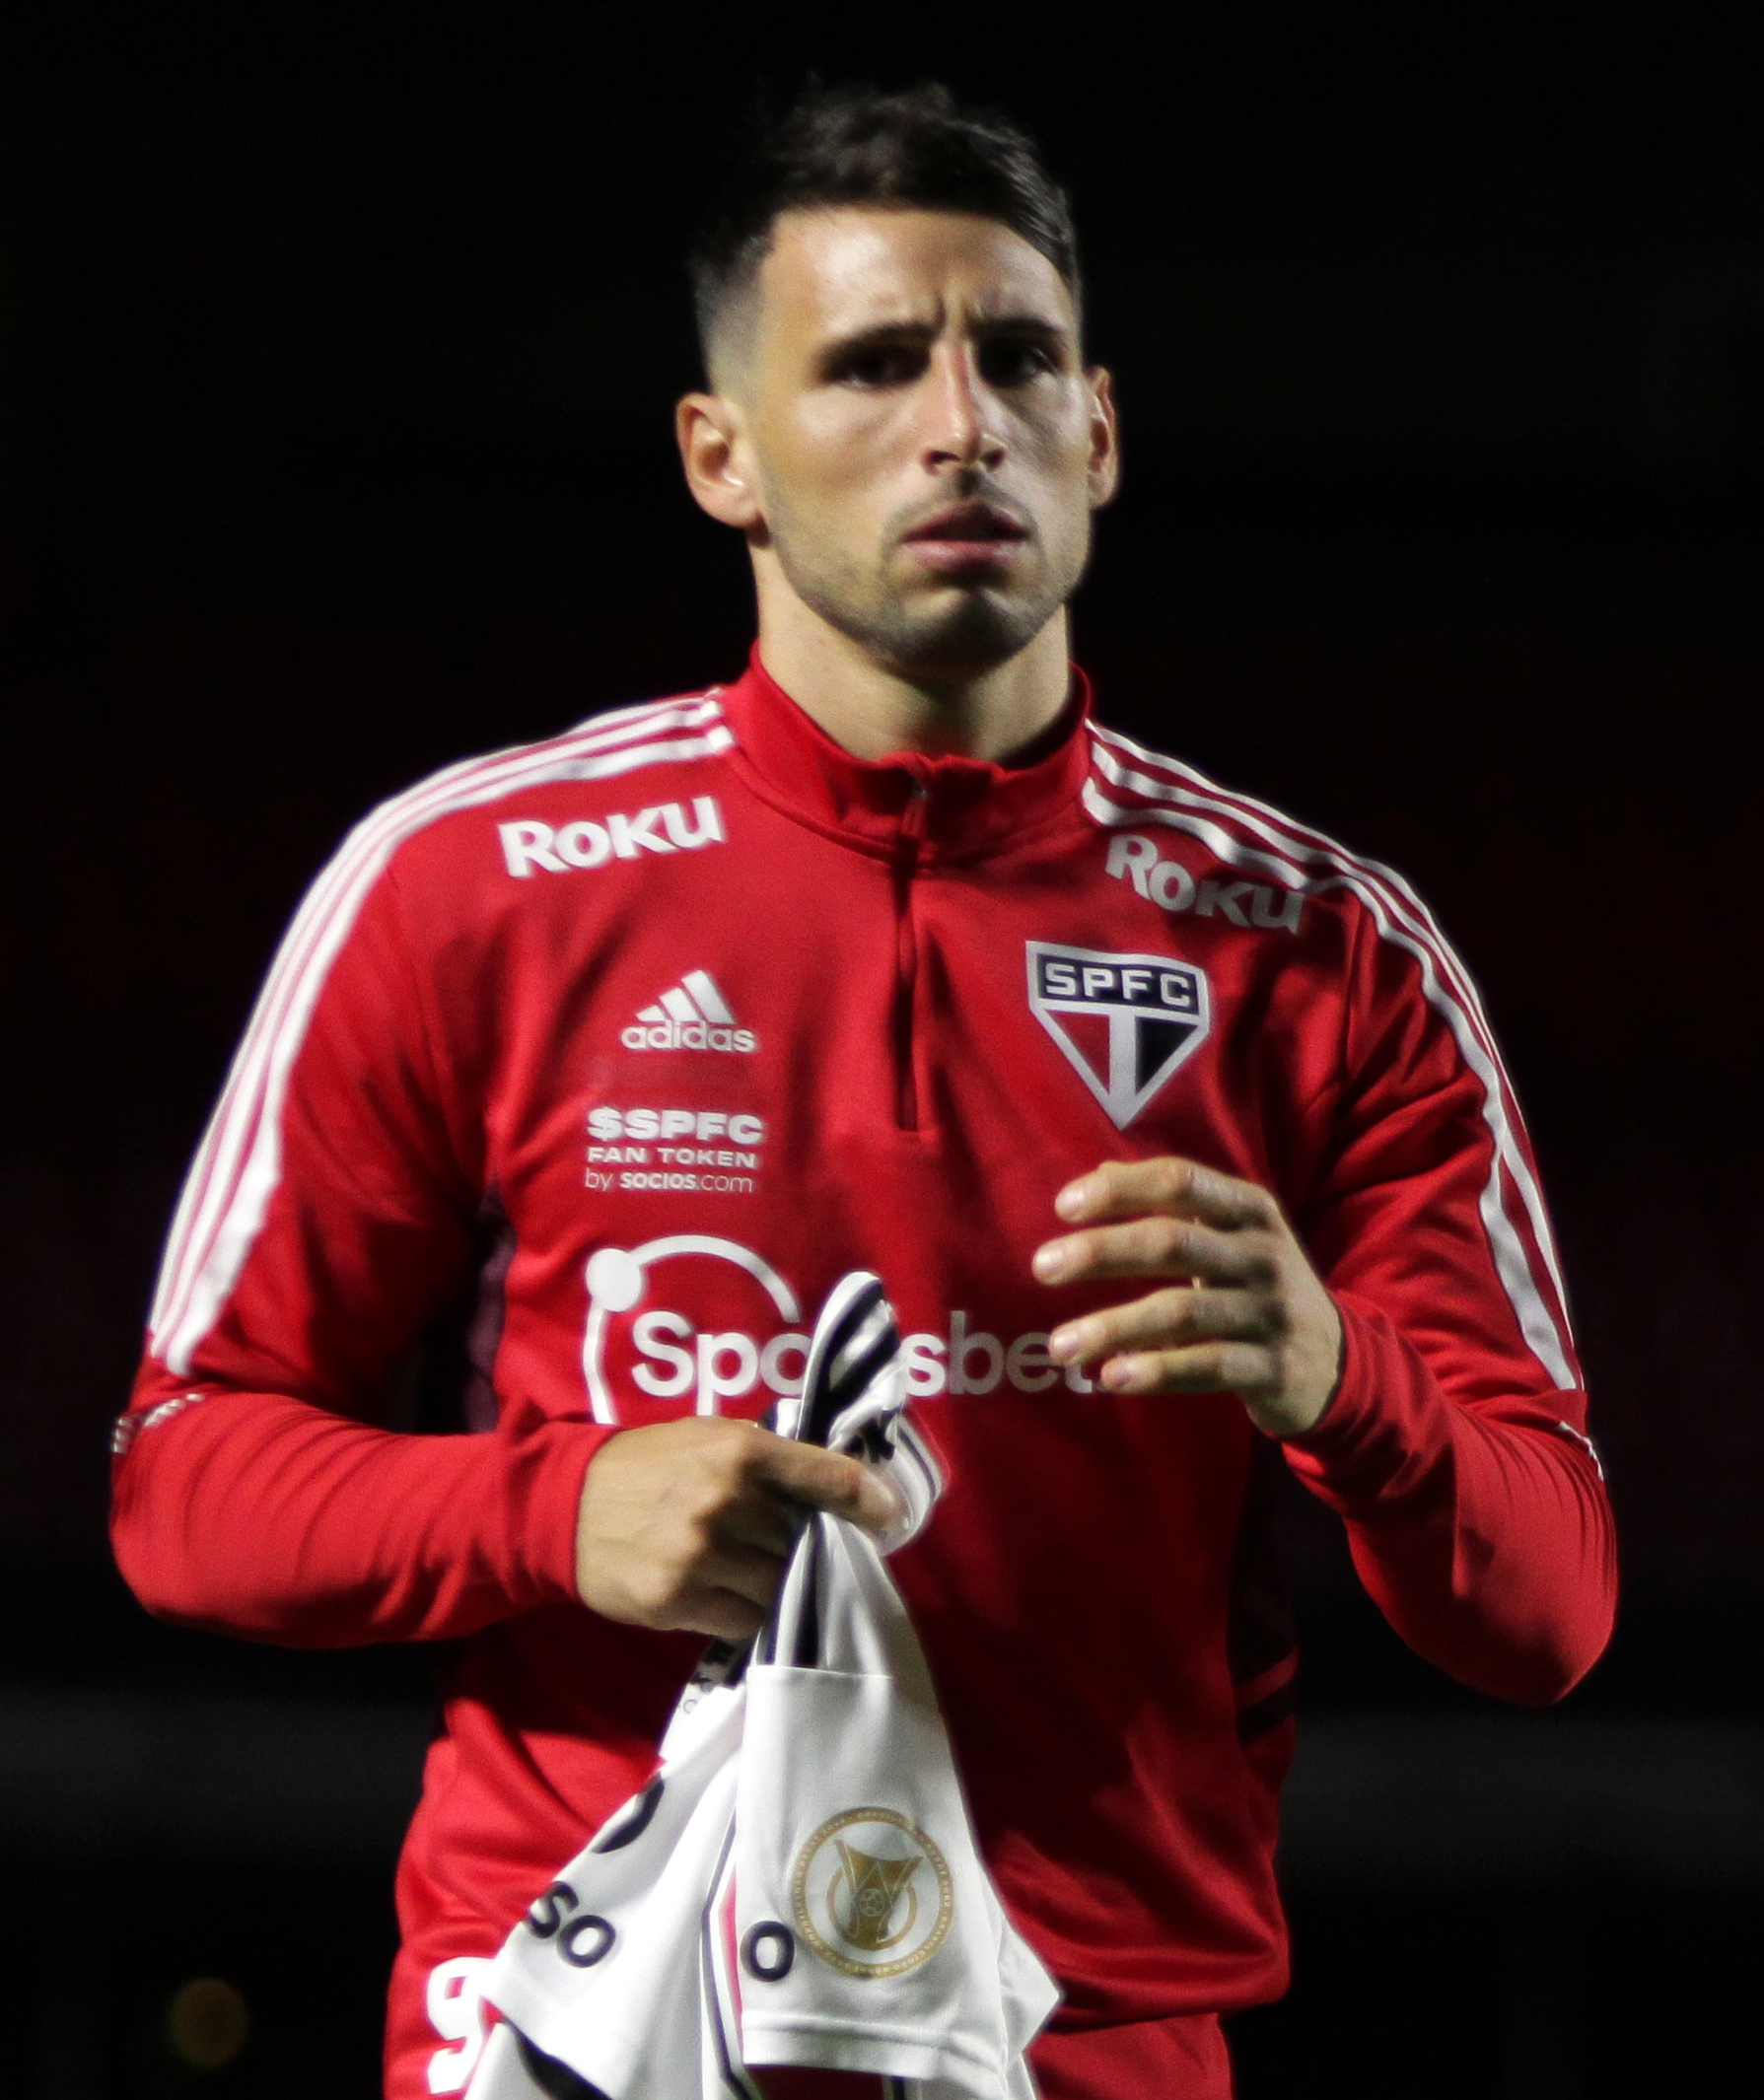 Calleri of Sao Paulo looks on during a match between Sao Paulo and Foto  di attualità - Getty Images